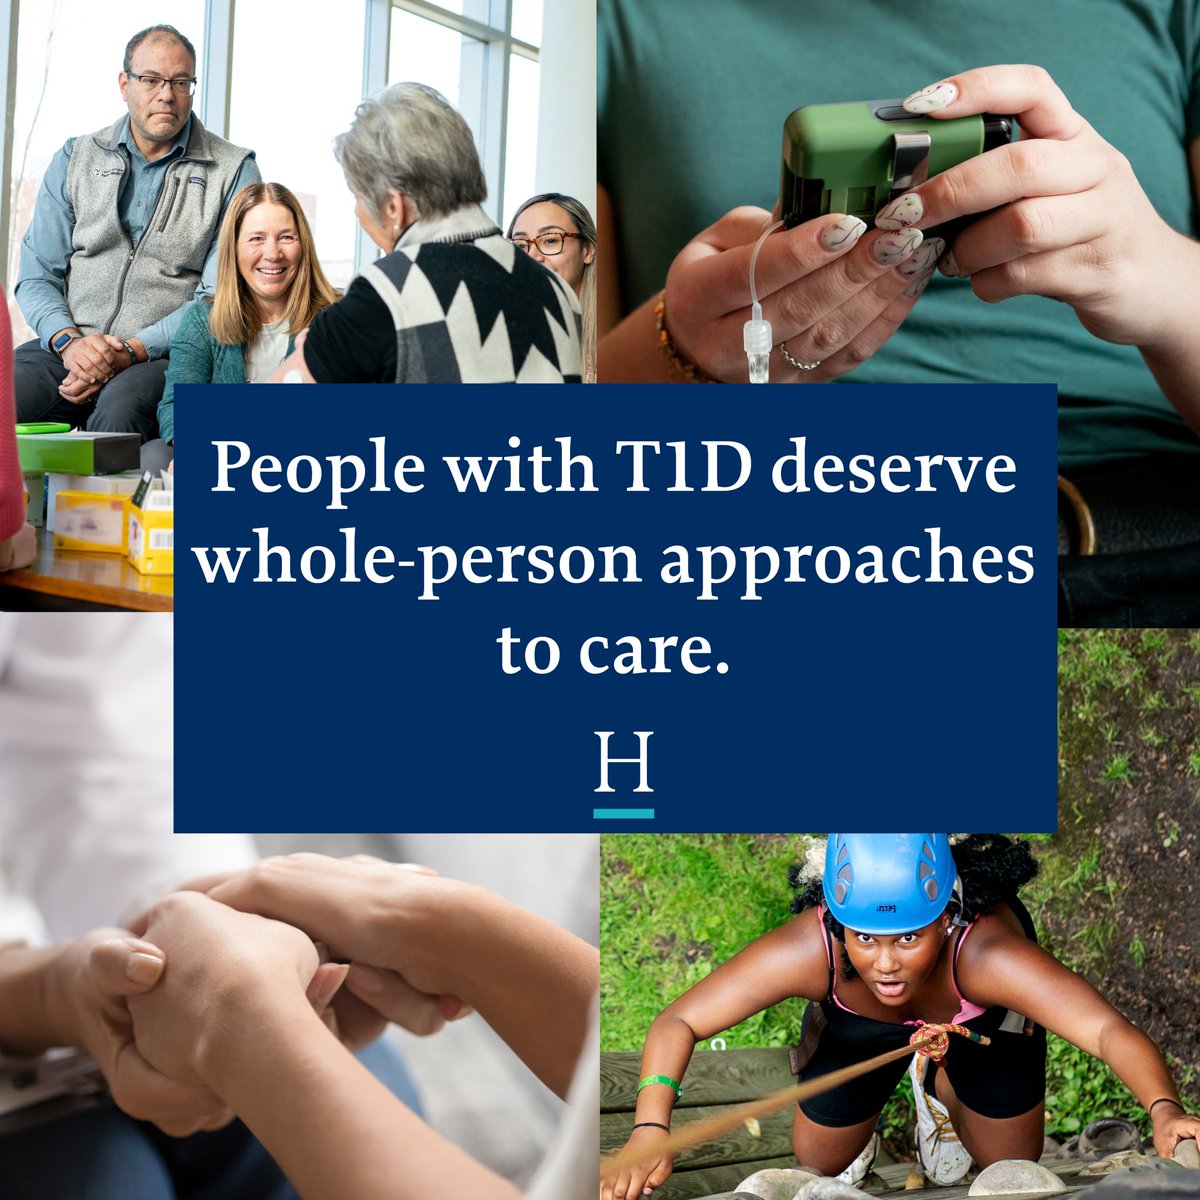 This Mental Health Awareness Month, we’re focused on the importance of supporting not just the physical needs but also the mental well-being of people with T1D. Living with type 1 diabetes (T1D) presents daily challenges, including managing blood sugar levels, monitoring food